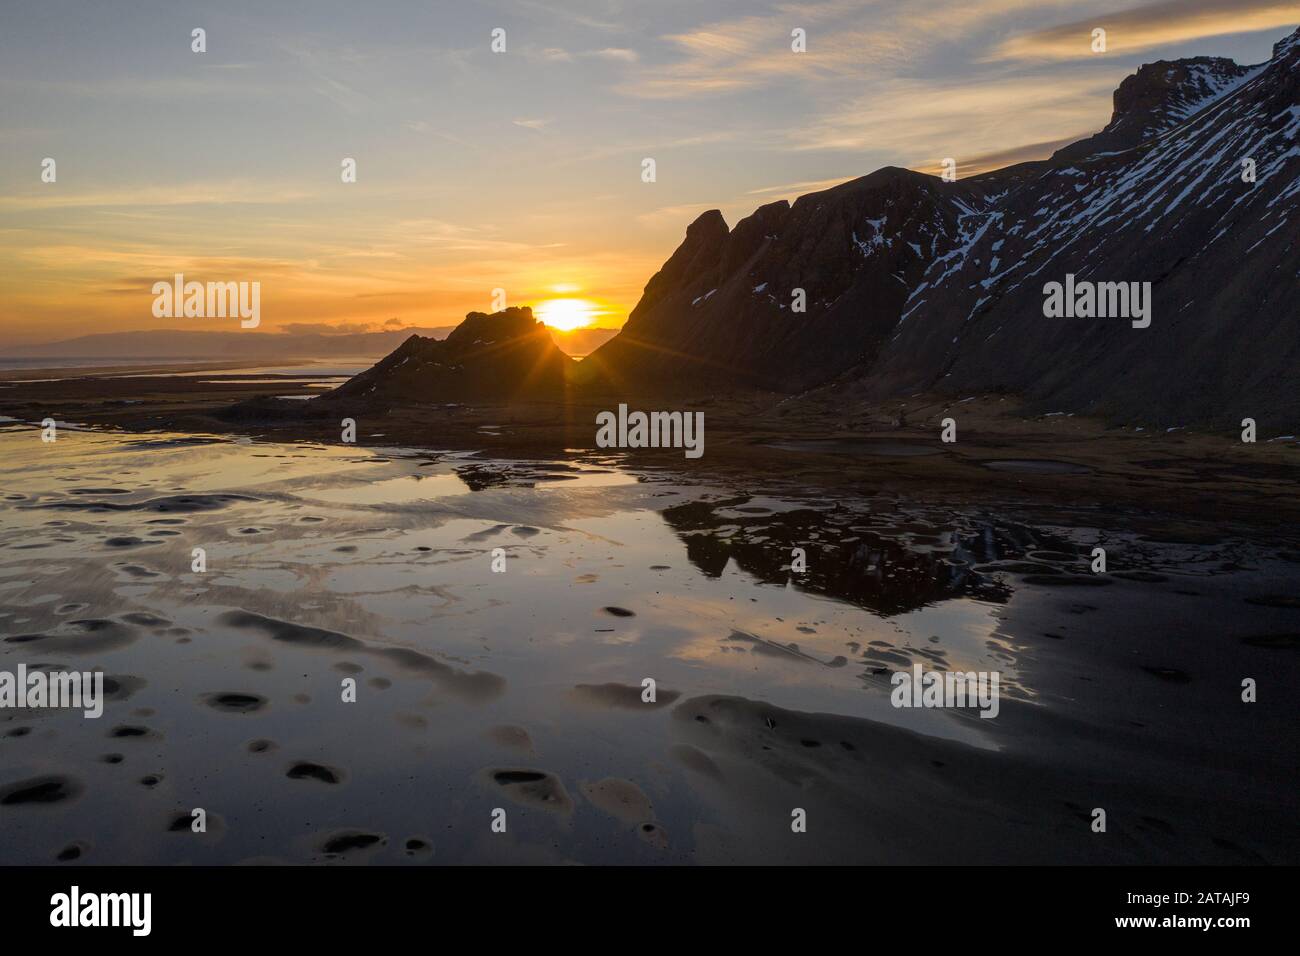 Aerial view of Vestrahorn mountains and Stokksnes beach during sunset. Iceland in early spring Stock Photo